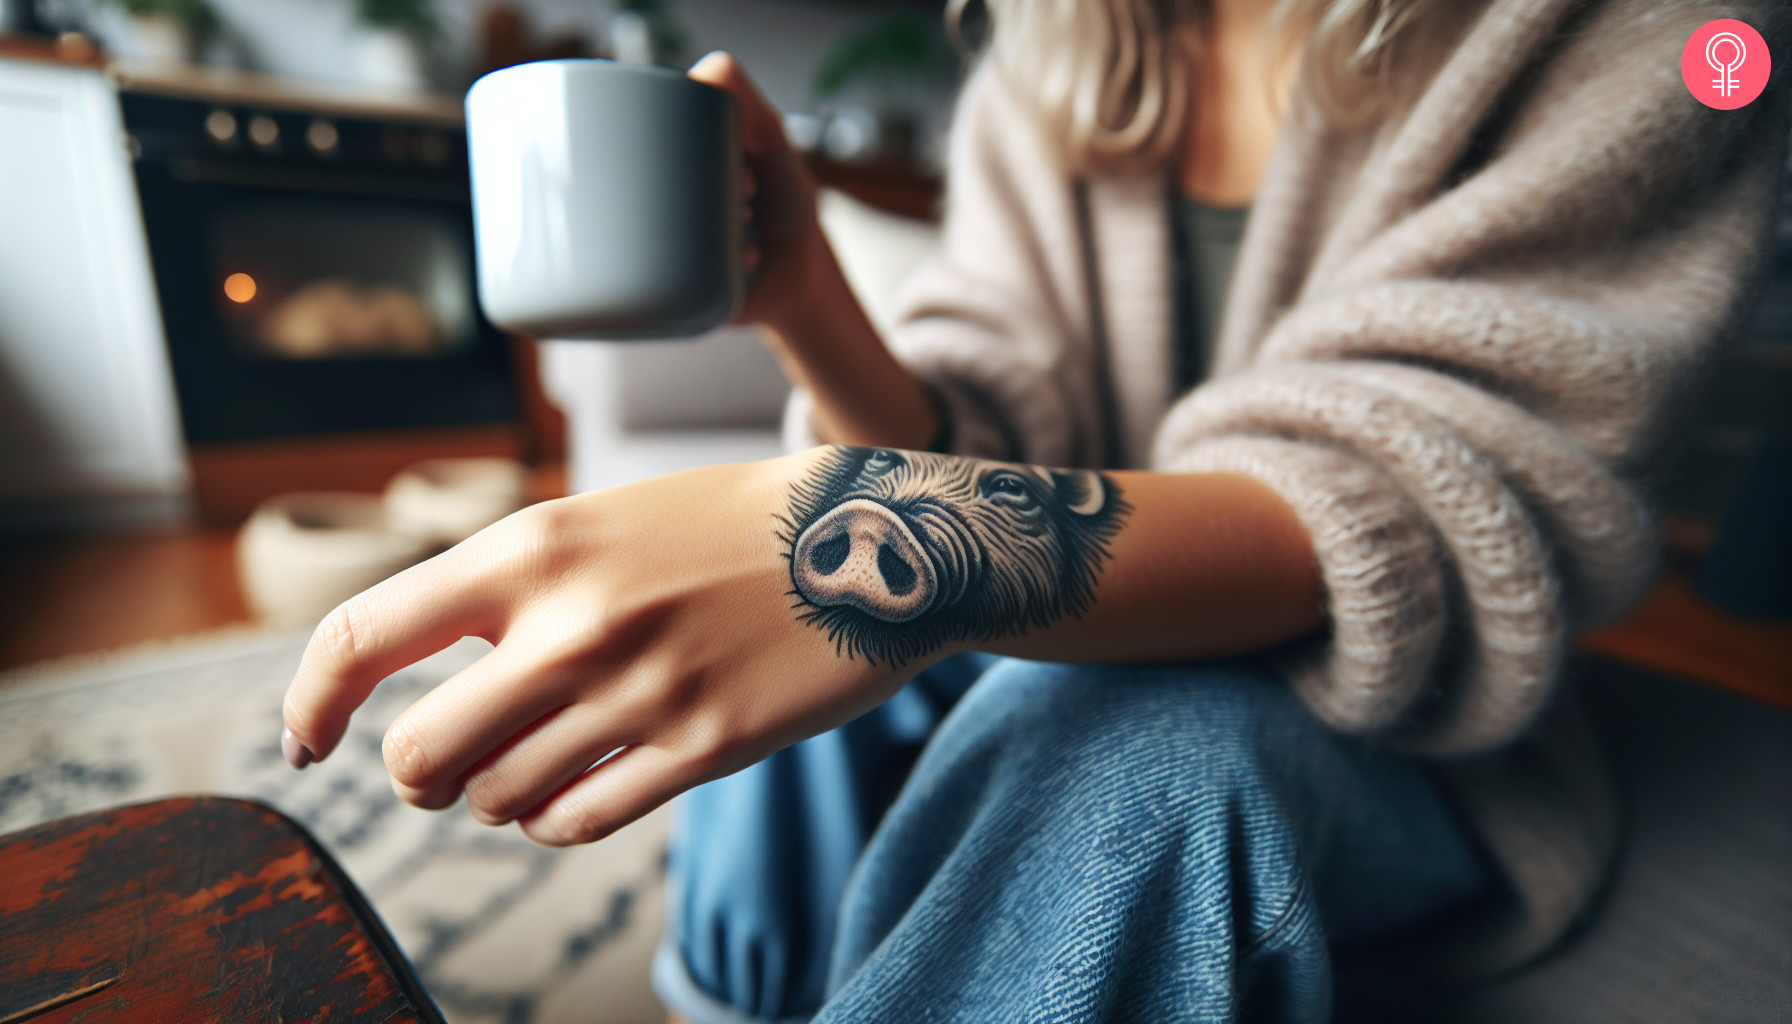 A tattoo of a pig snout on a woman’s wrist